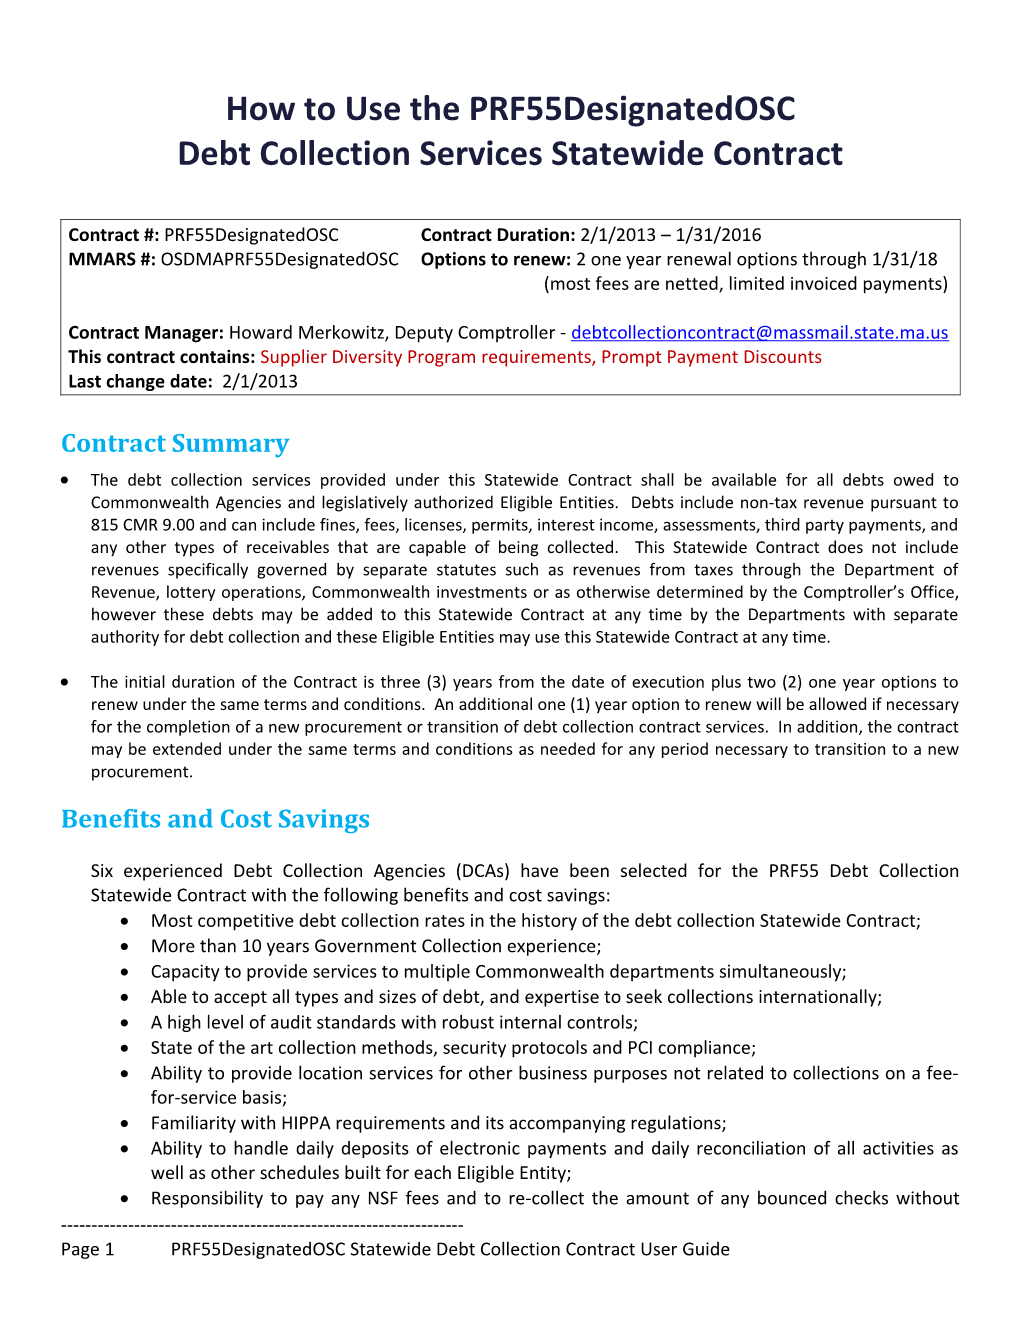 Debt Collection Services Statewide Contract